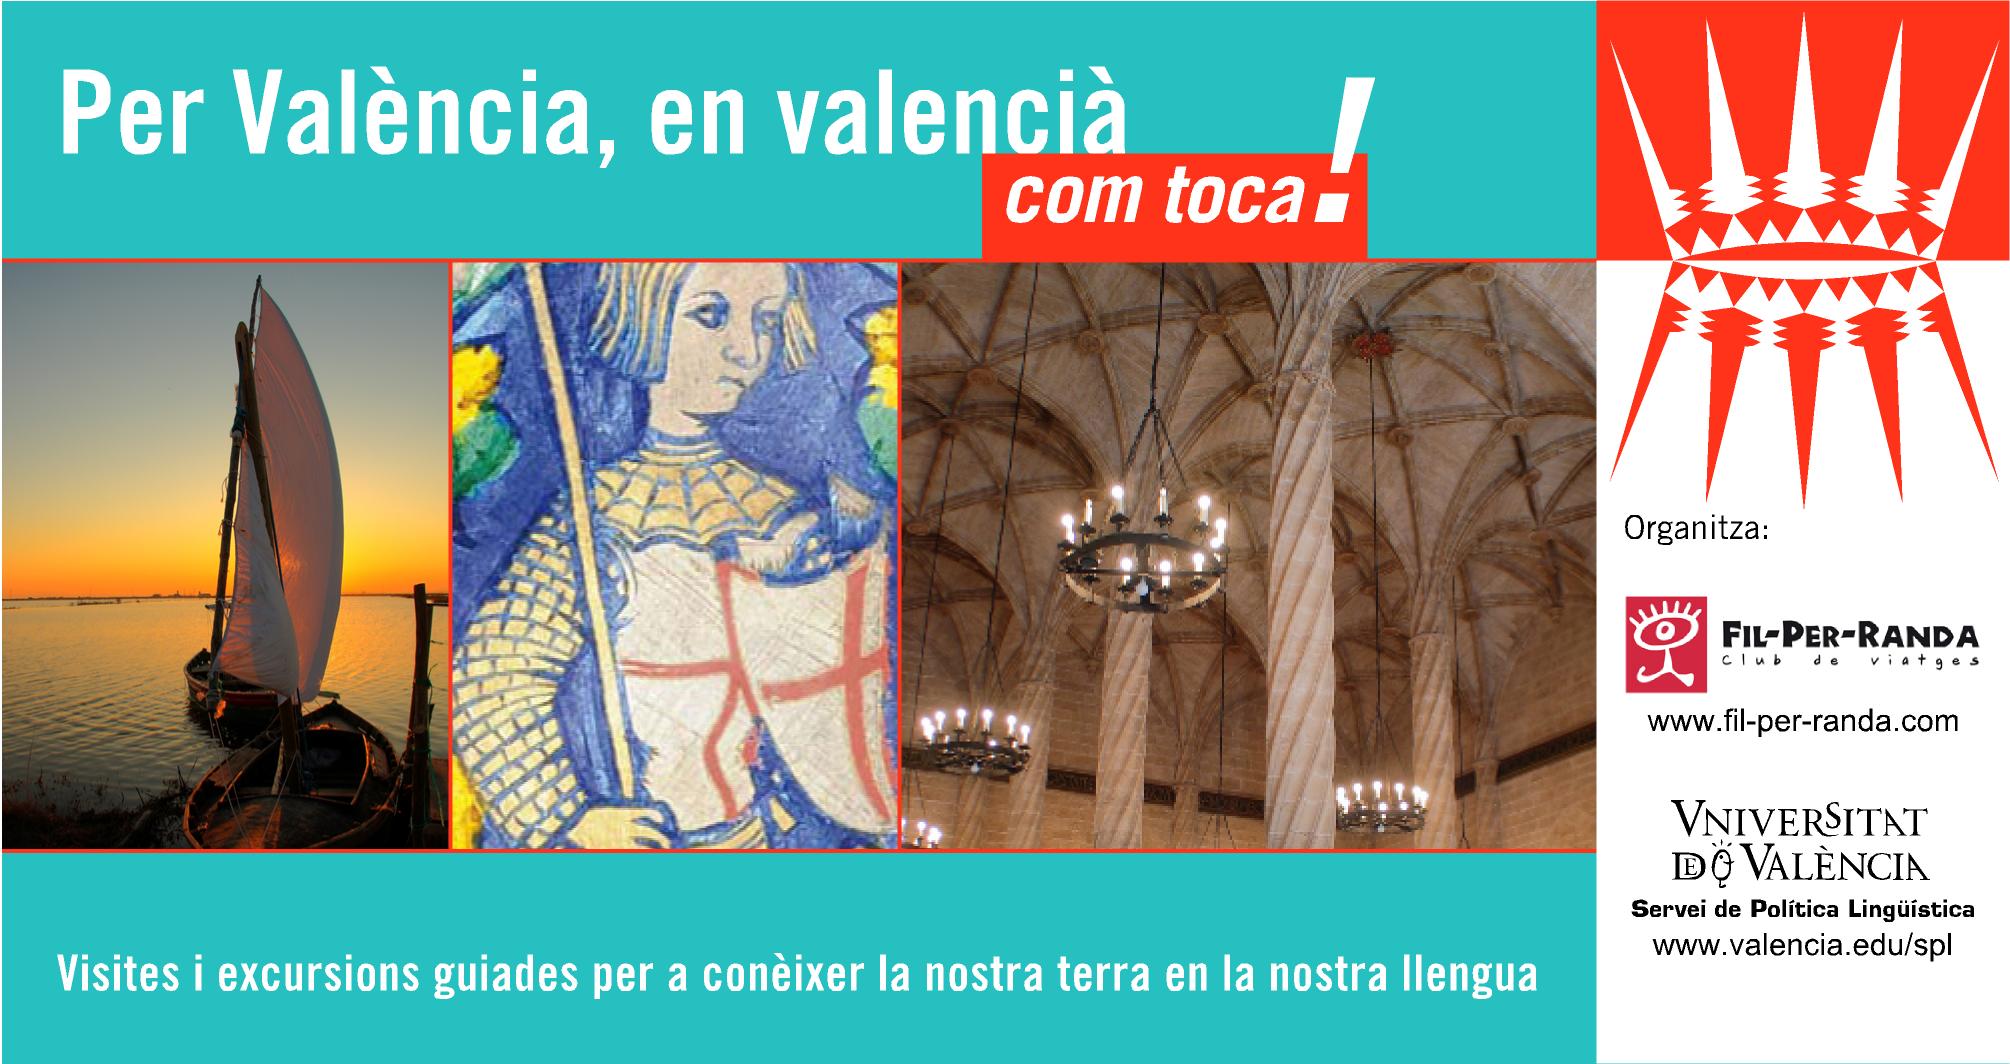 Visits and guided tours in Valencian Poster